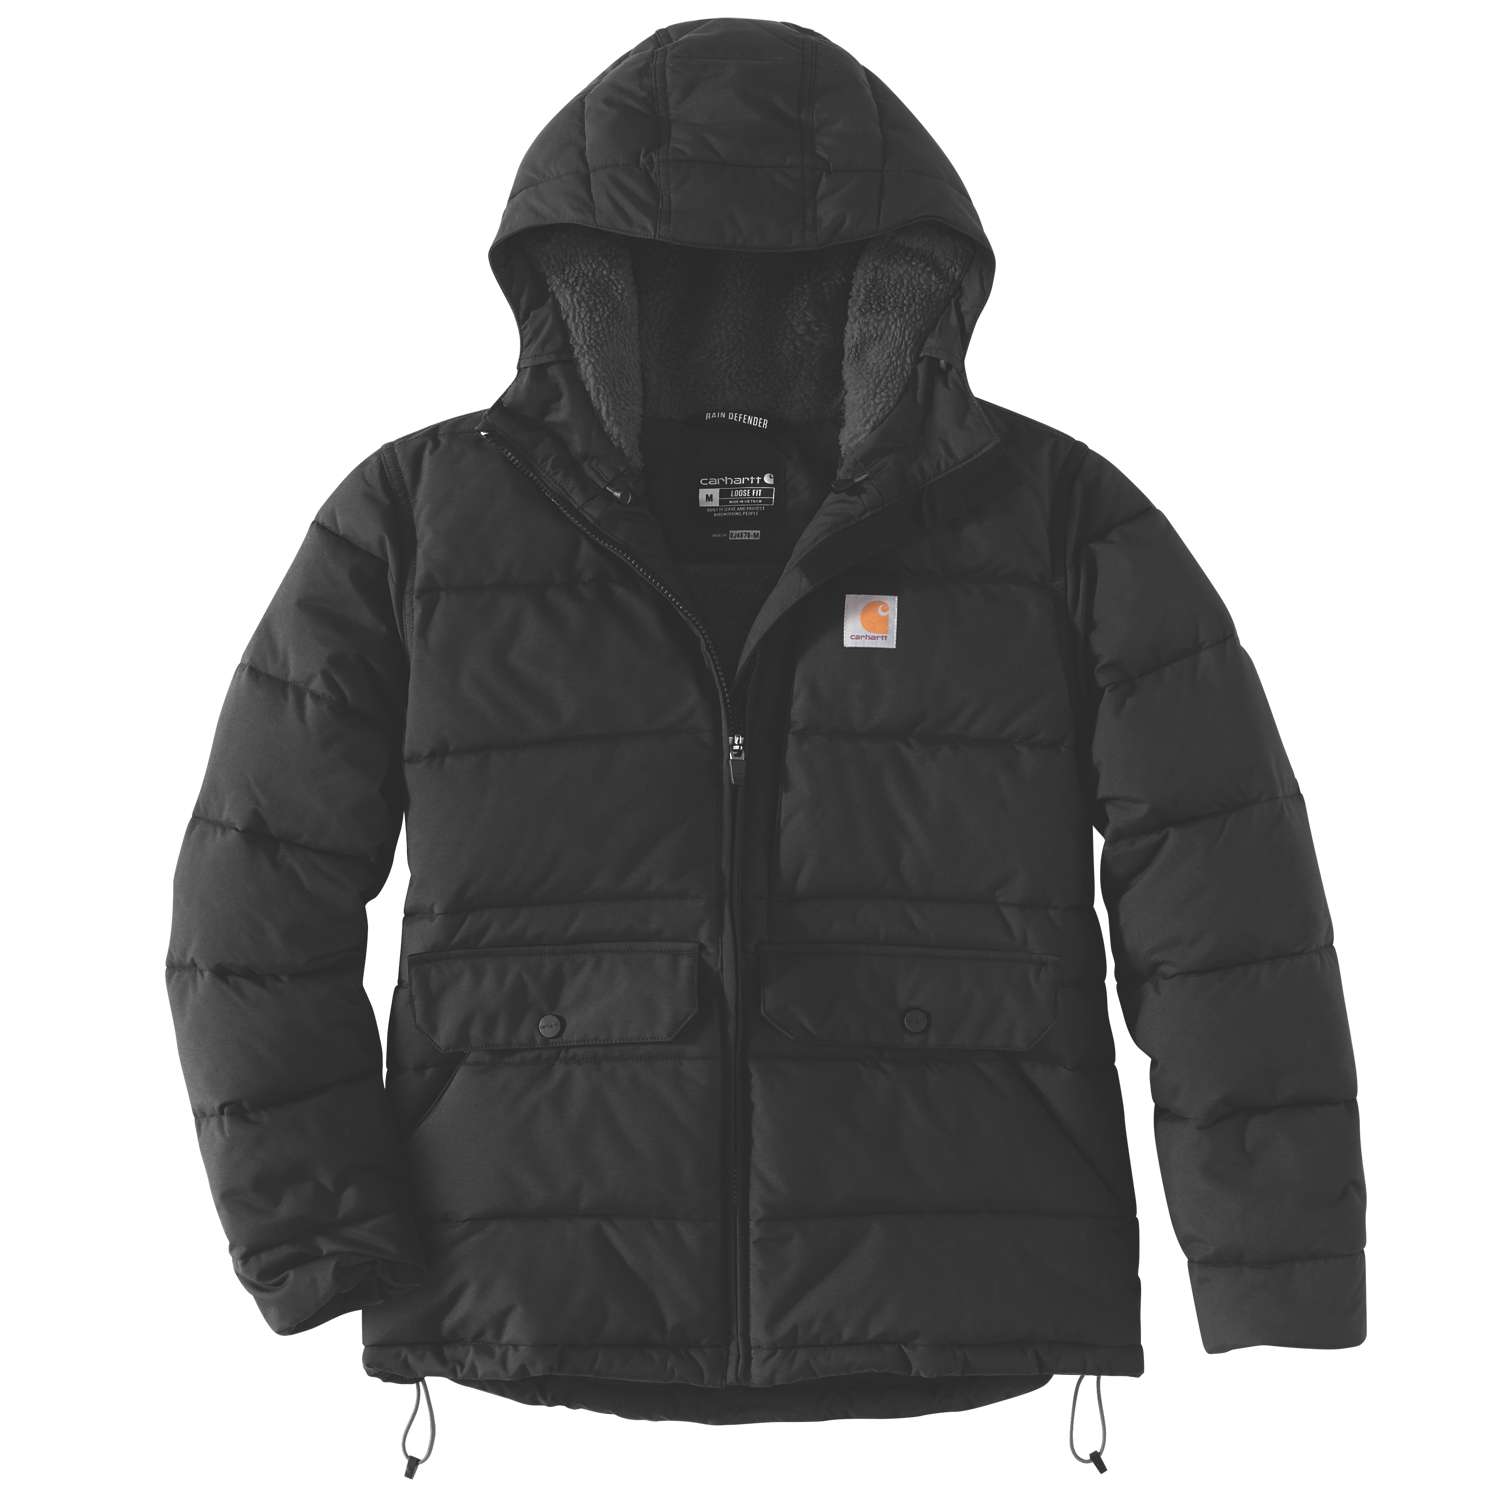 Carhartt Insulated Jacket With Water Repellent Finish And Wind Fighter ...